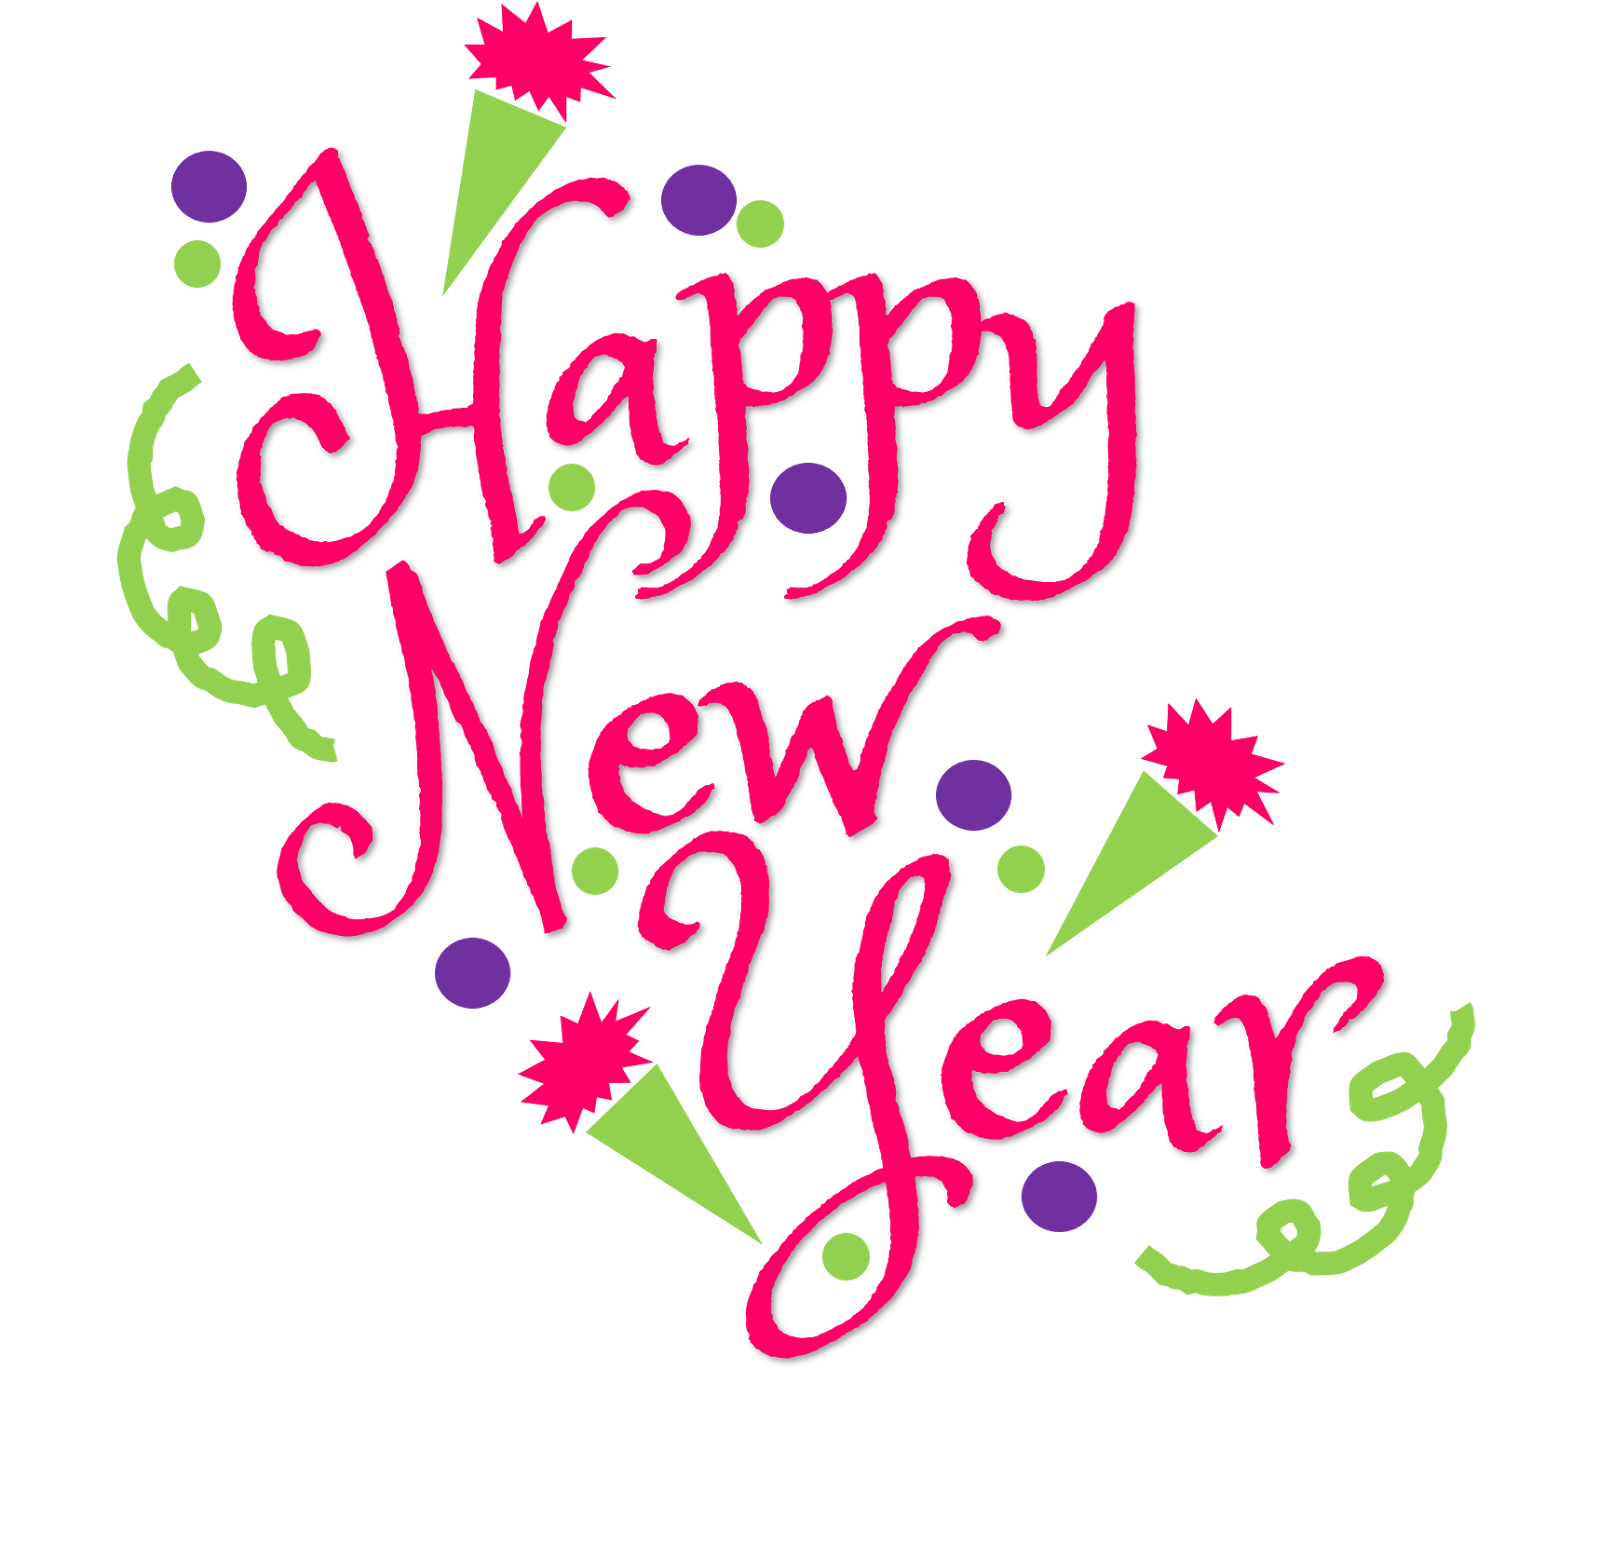 Happy new year images. Words clipart club